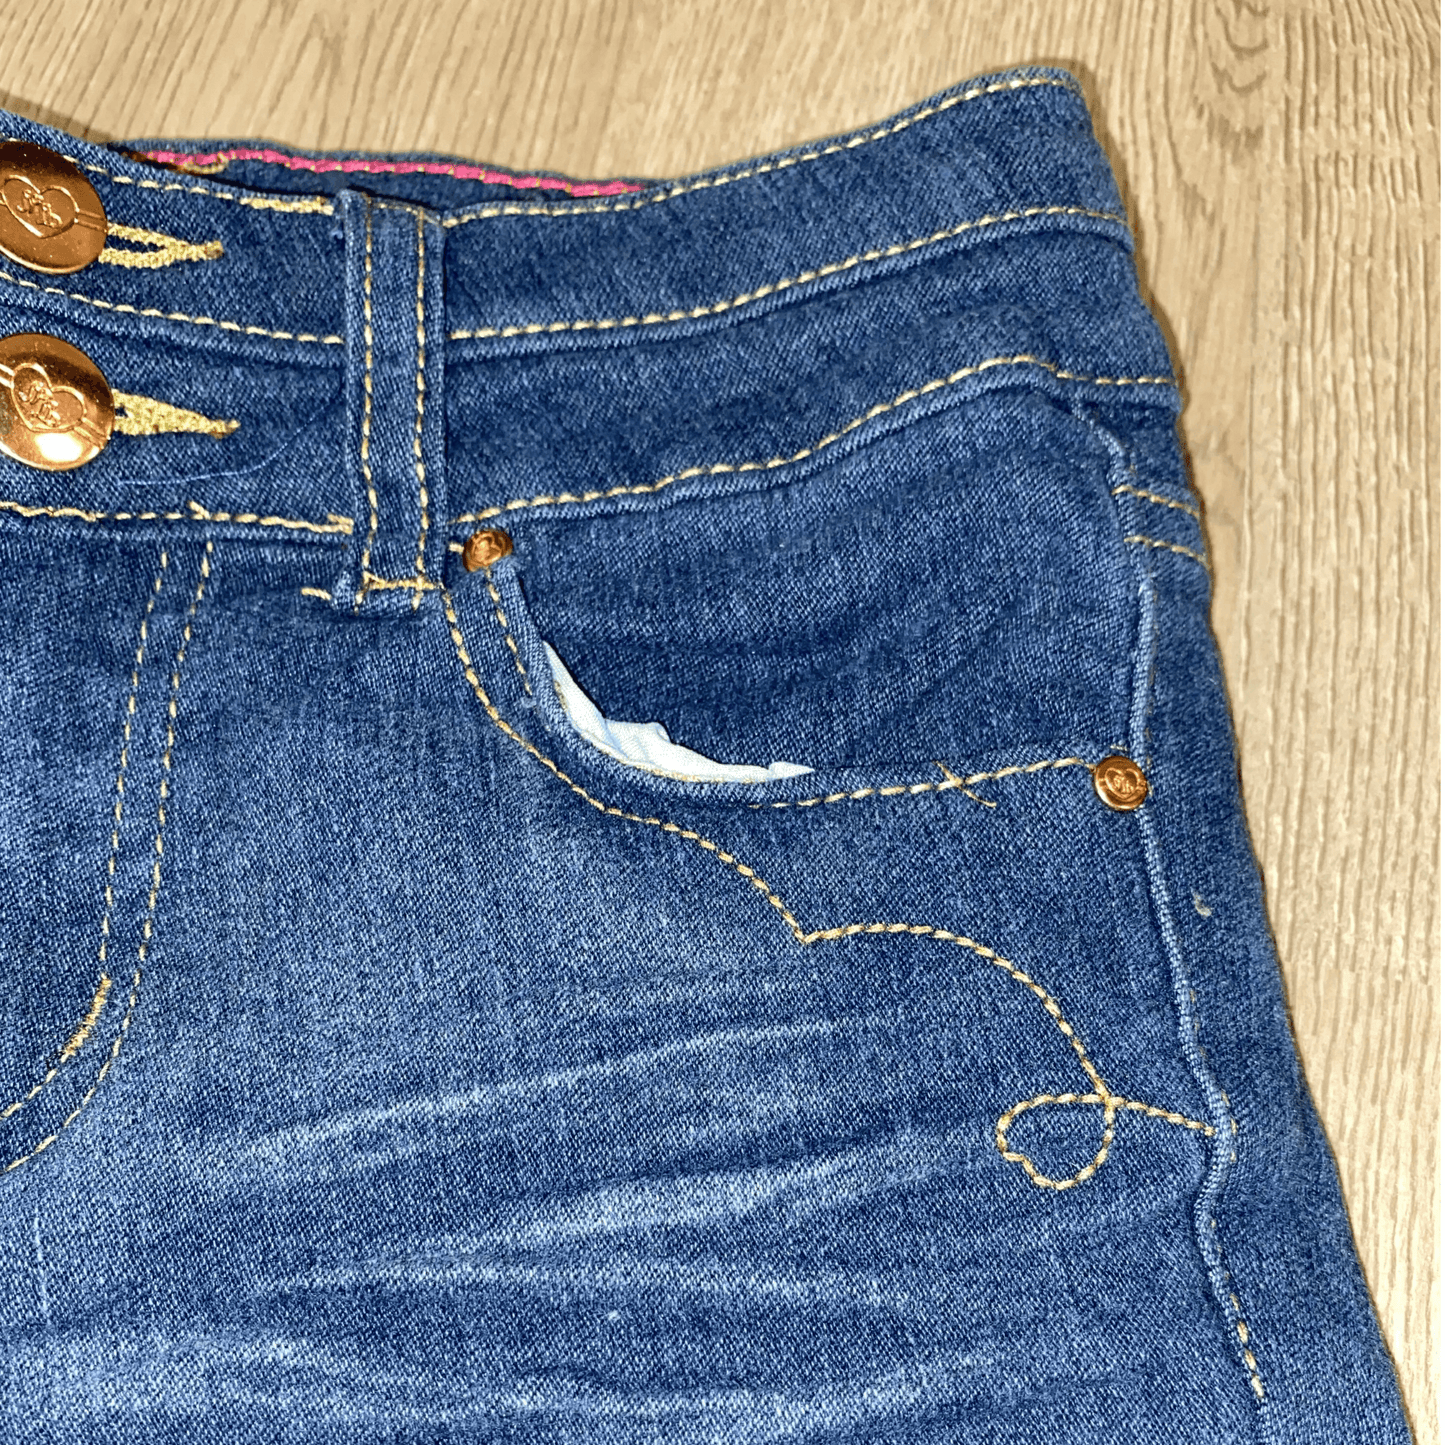 Detailing on the front of the distressed jeans.